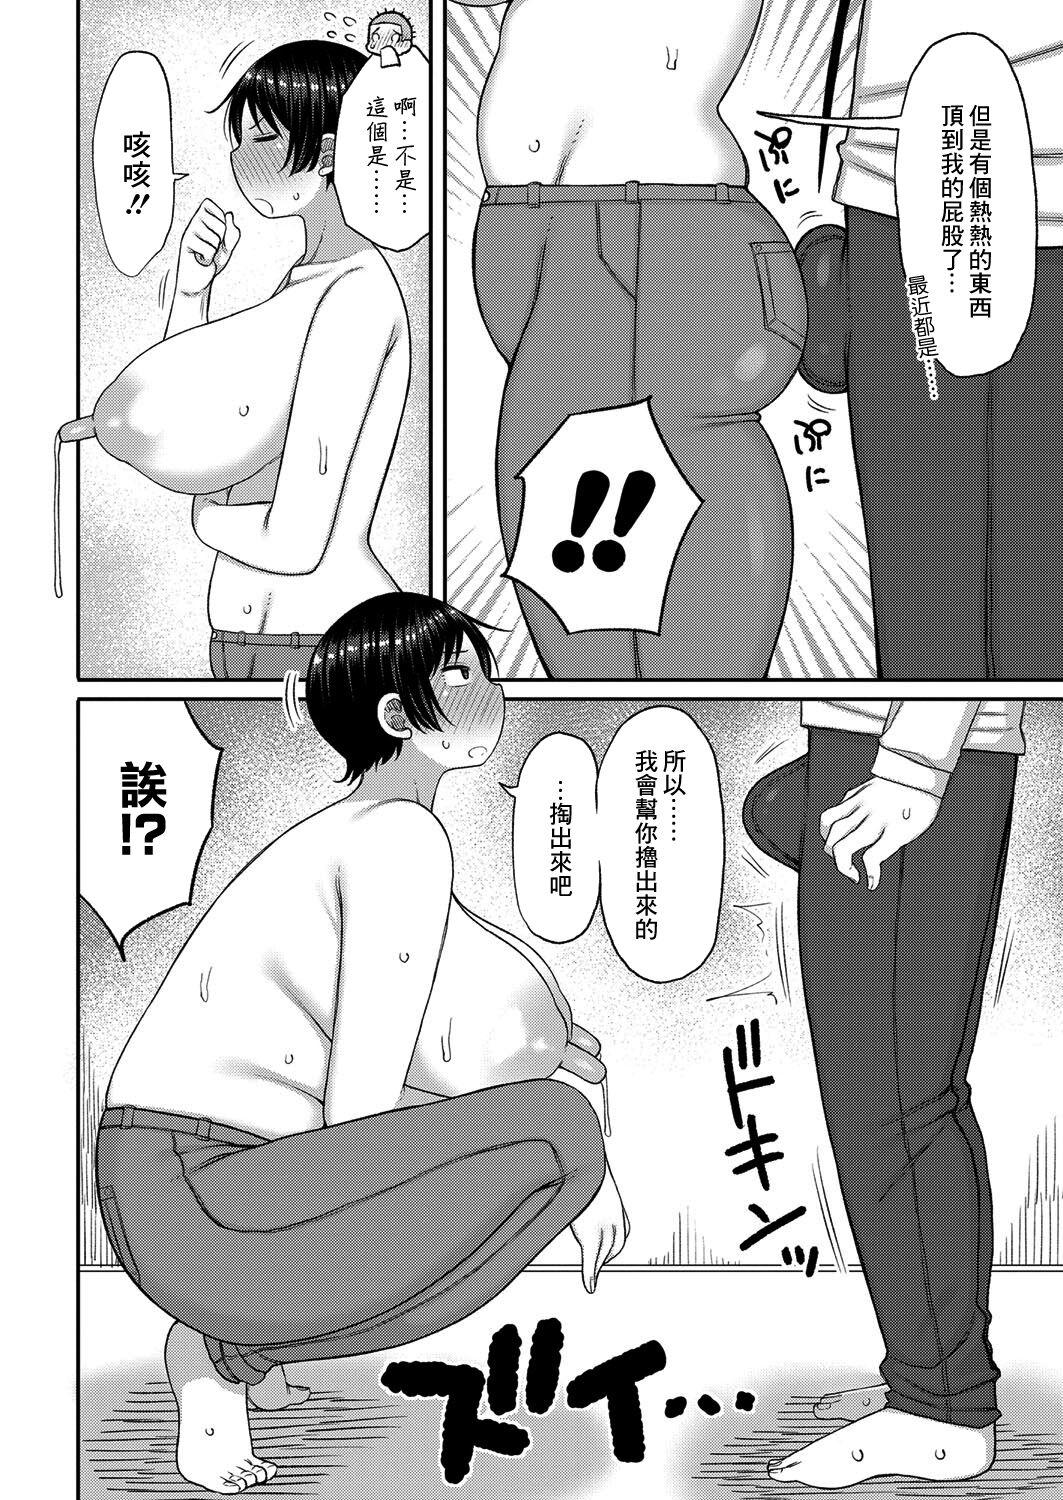 Friends 母さんの乳を榨る日々 Hooker - Page 6